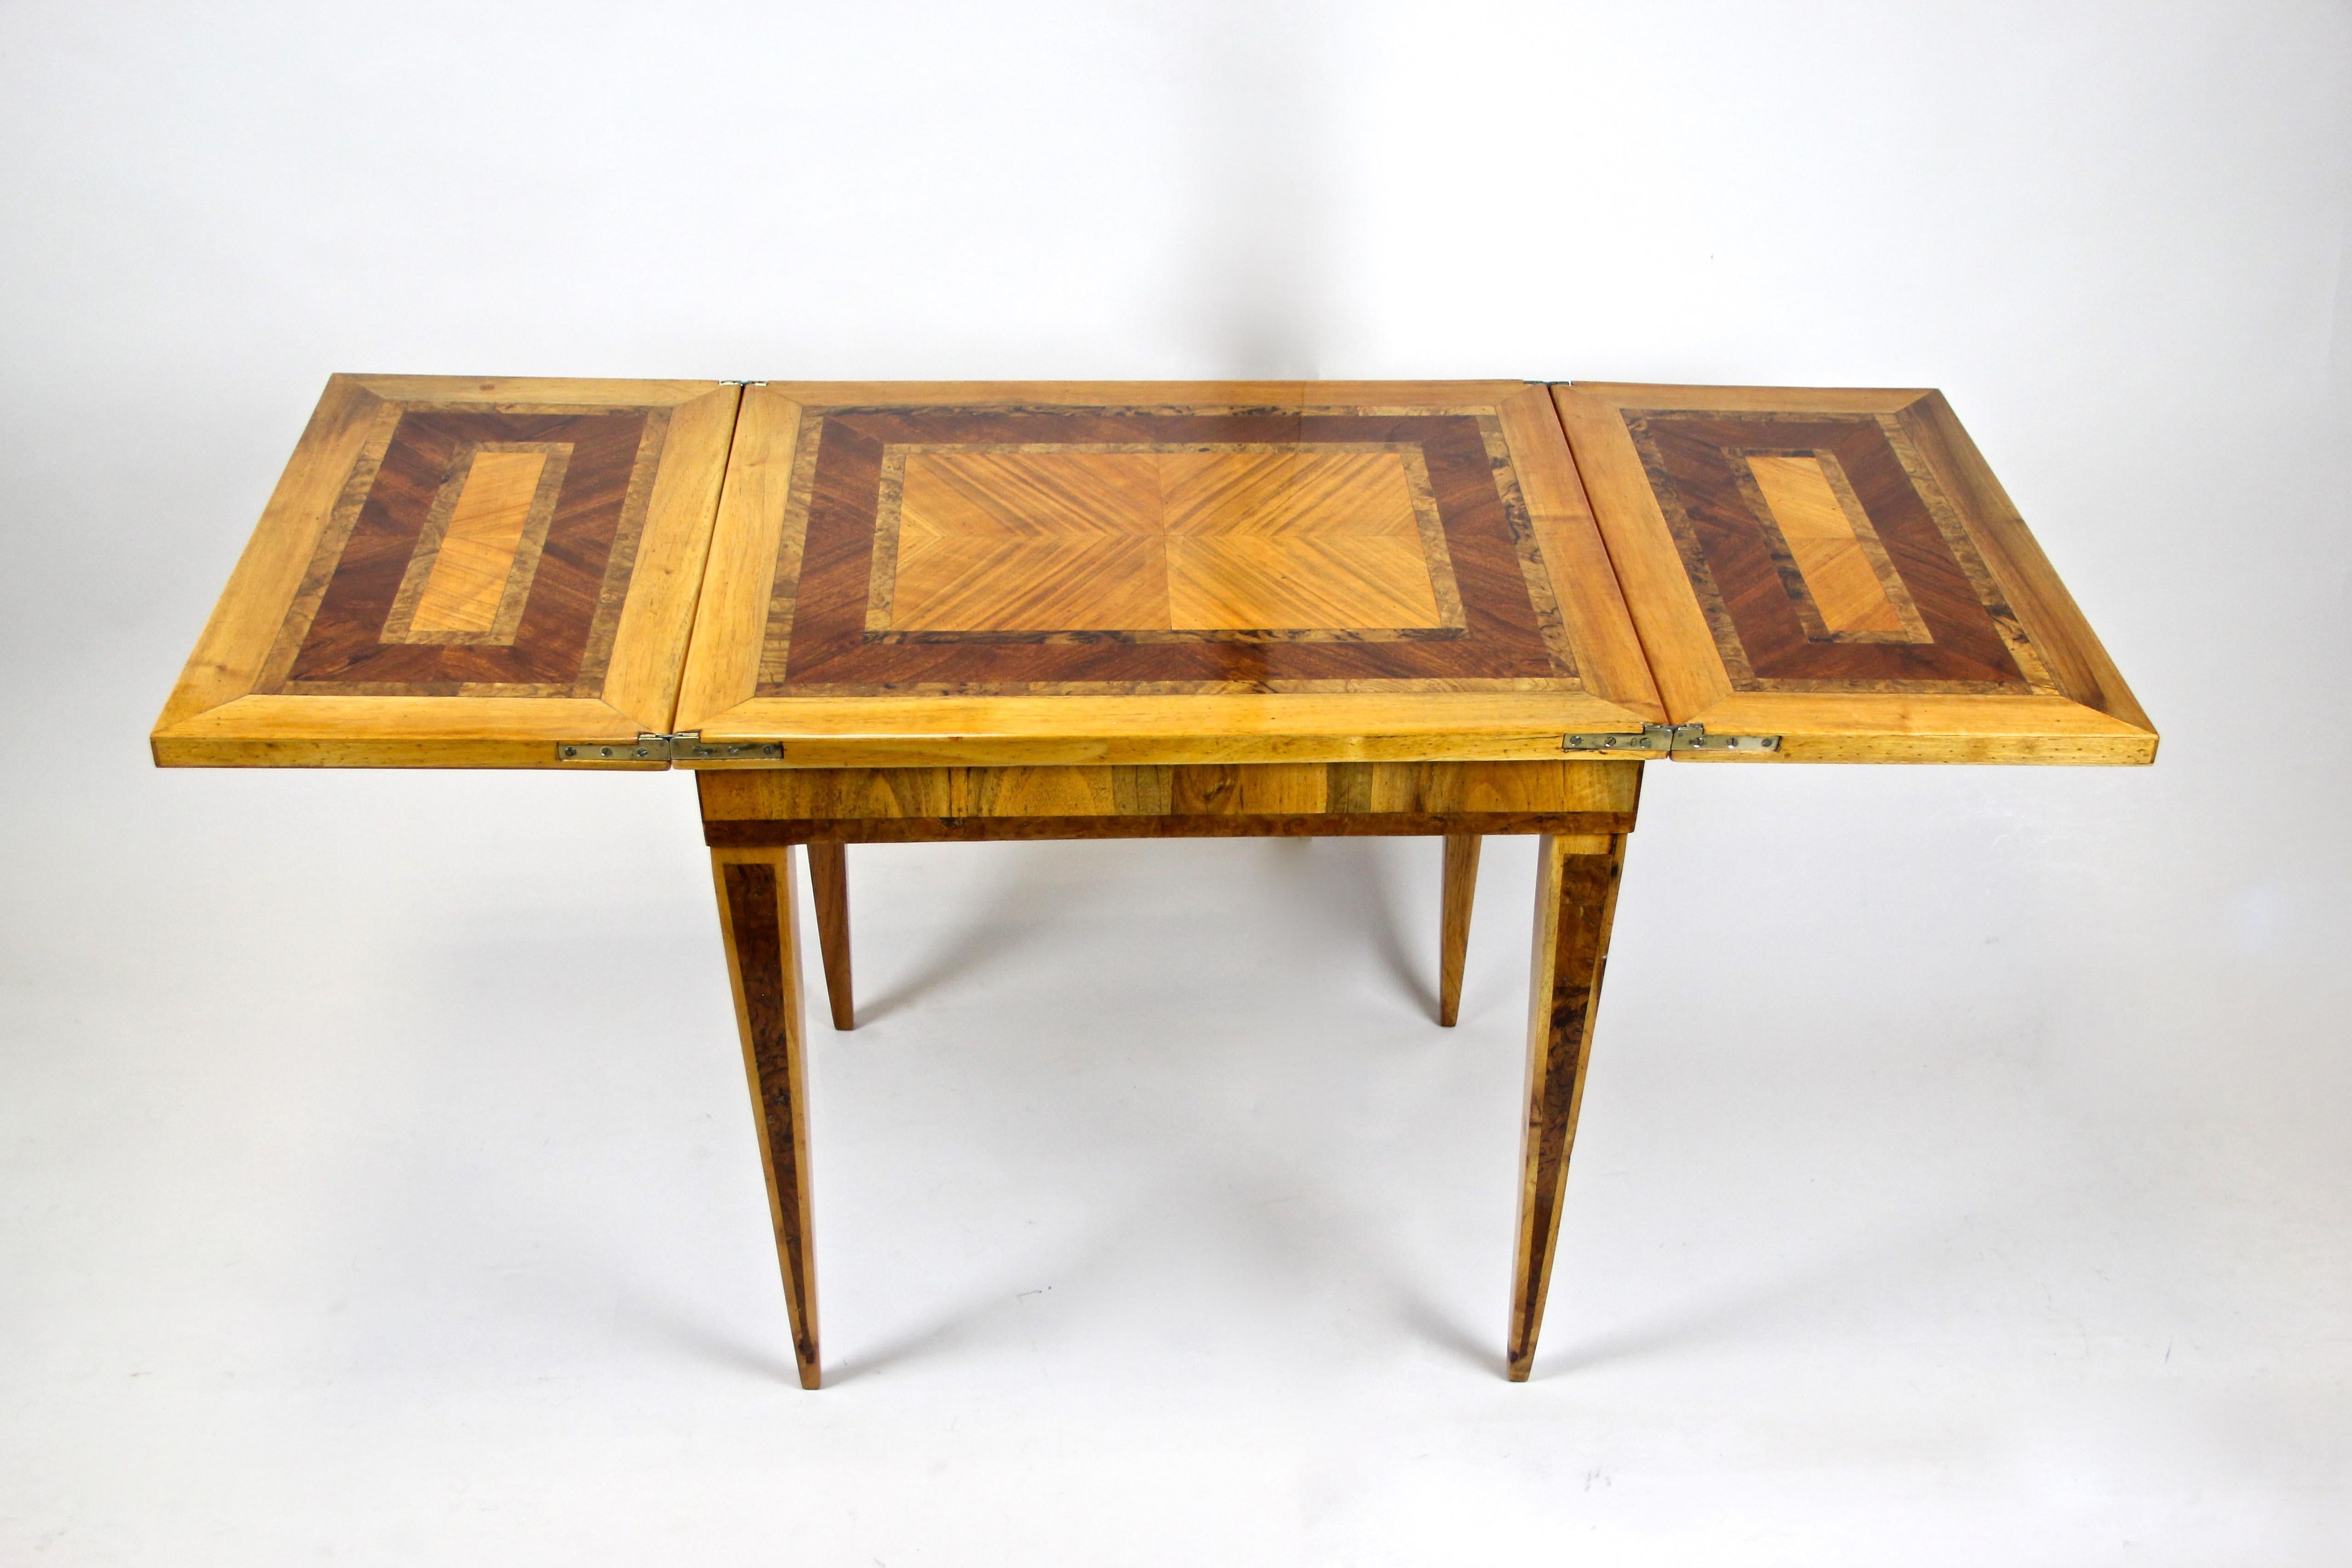 Outstanding late 18th century folding side table from the so-called 